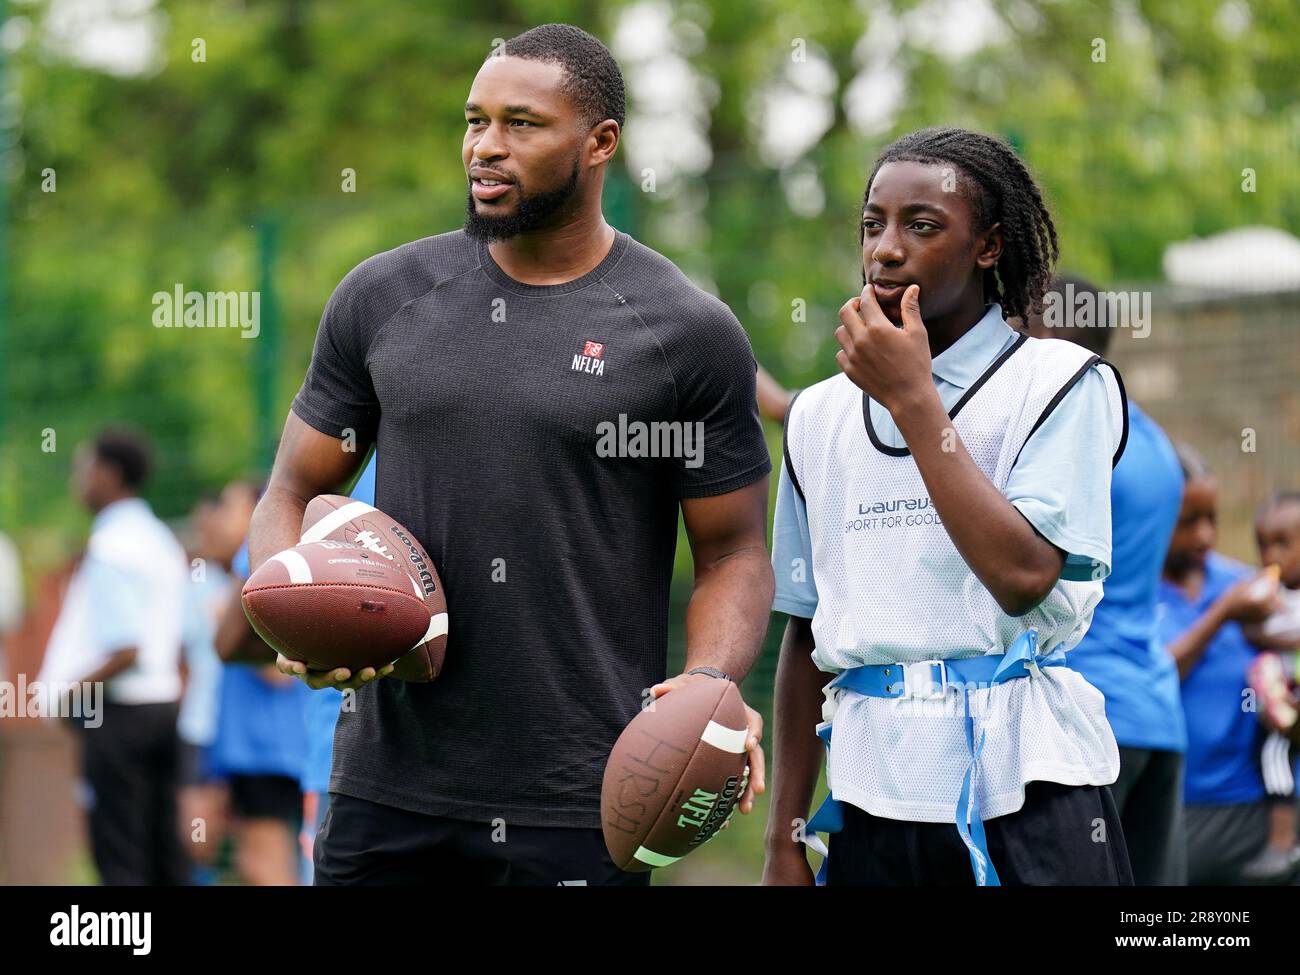 Kevin Byard from the NFL team Tennessee Titans coaches students during a visit to Gladesmore Community School, London. Stock Photo